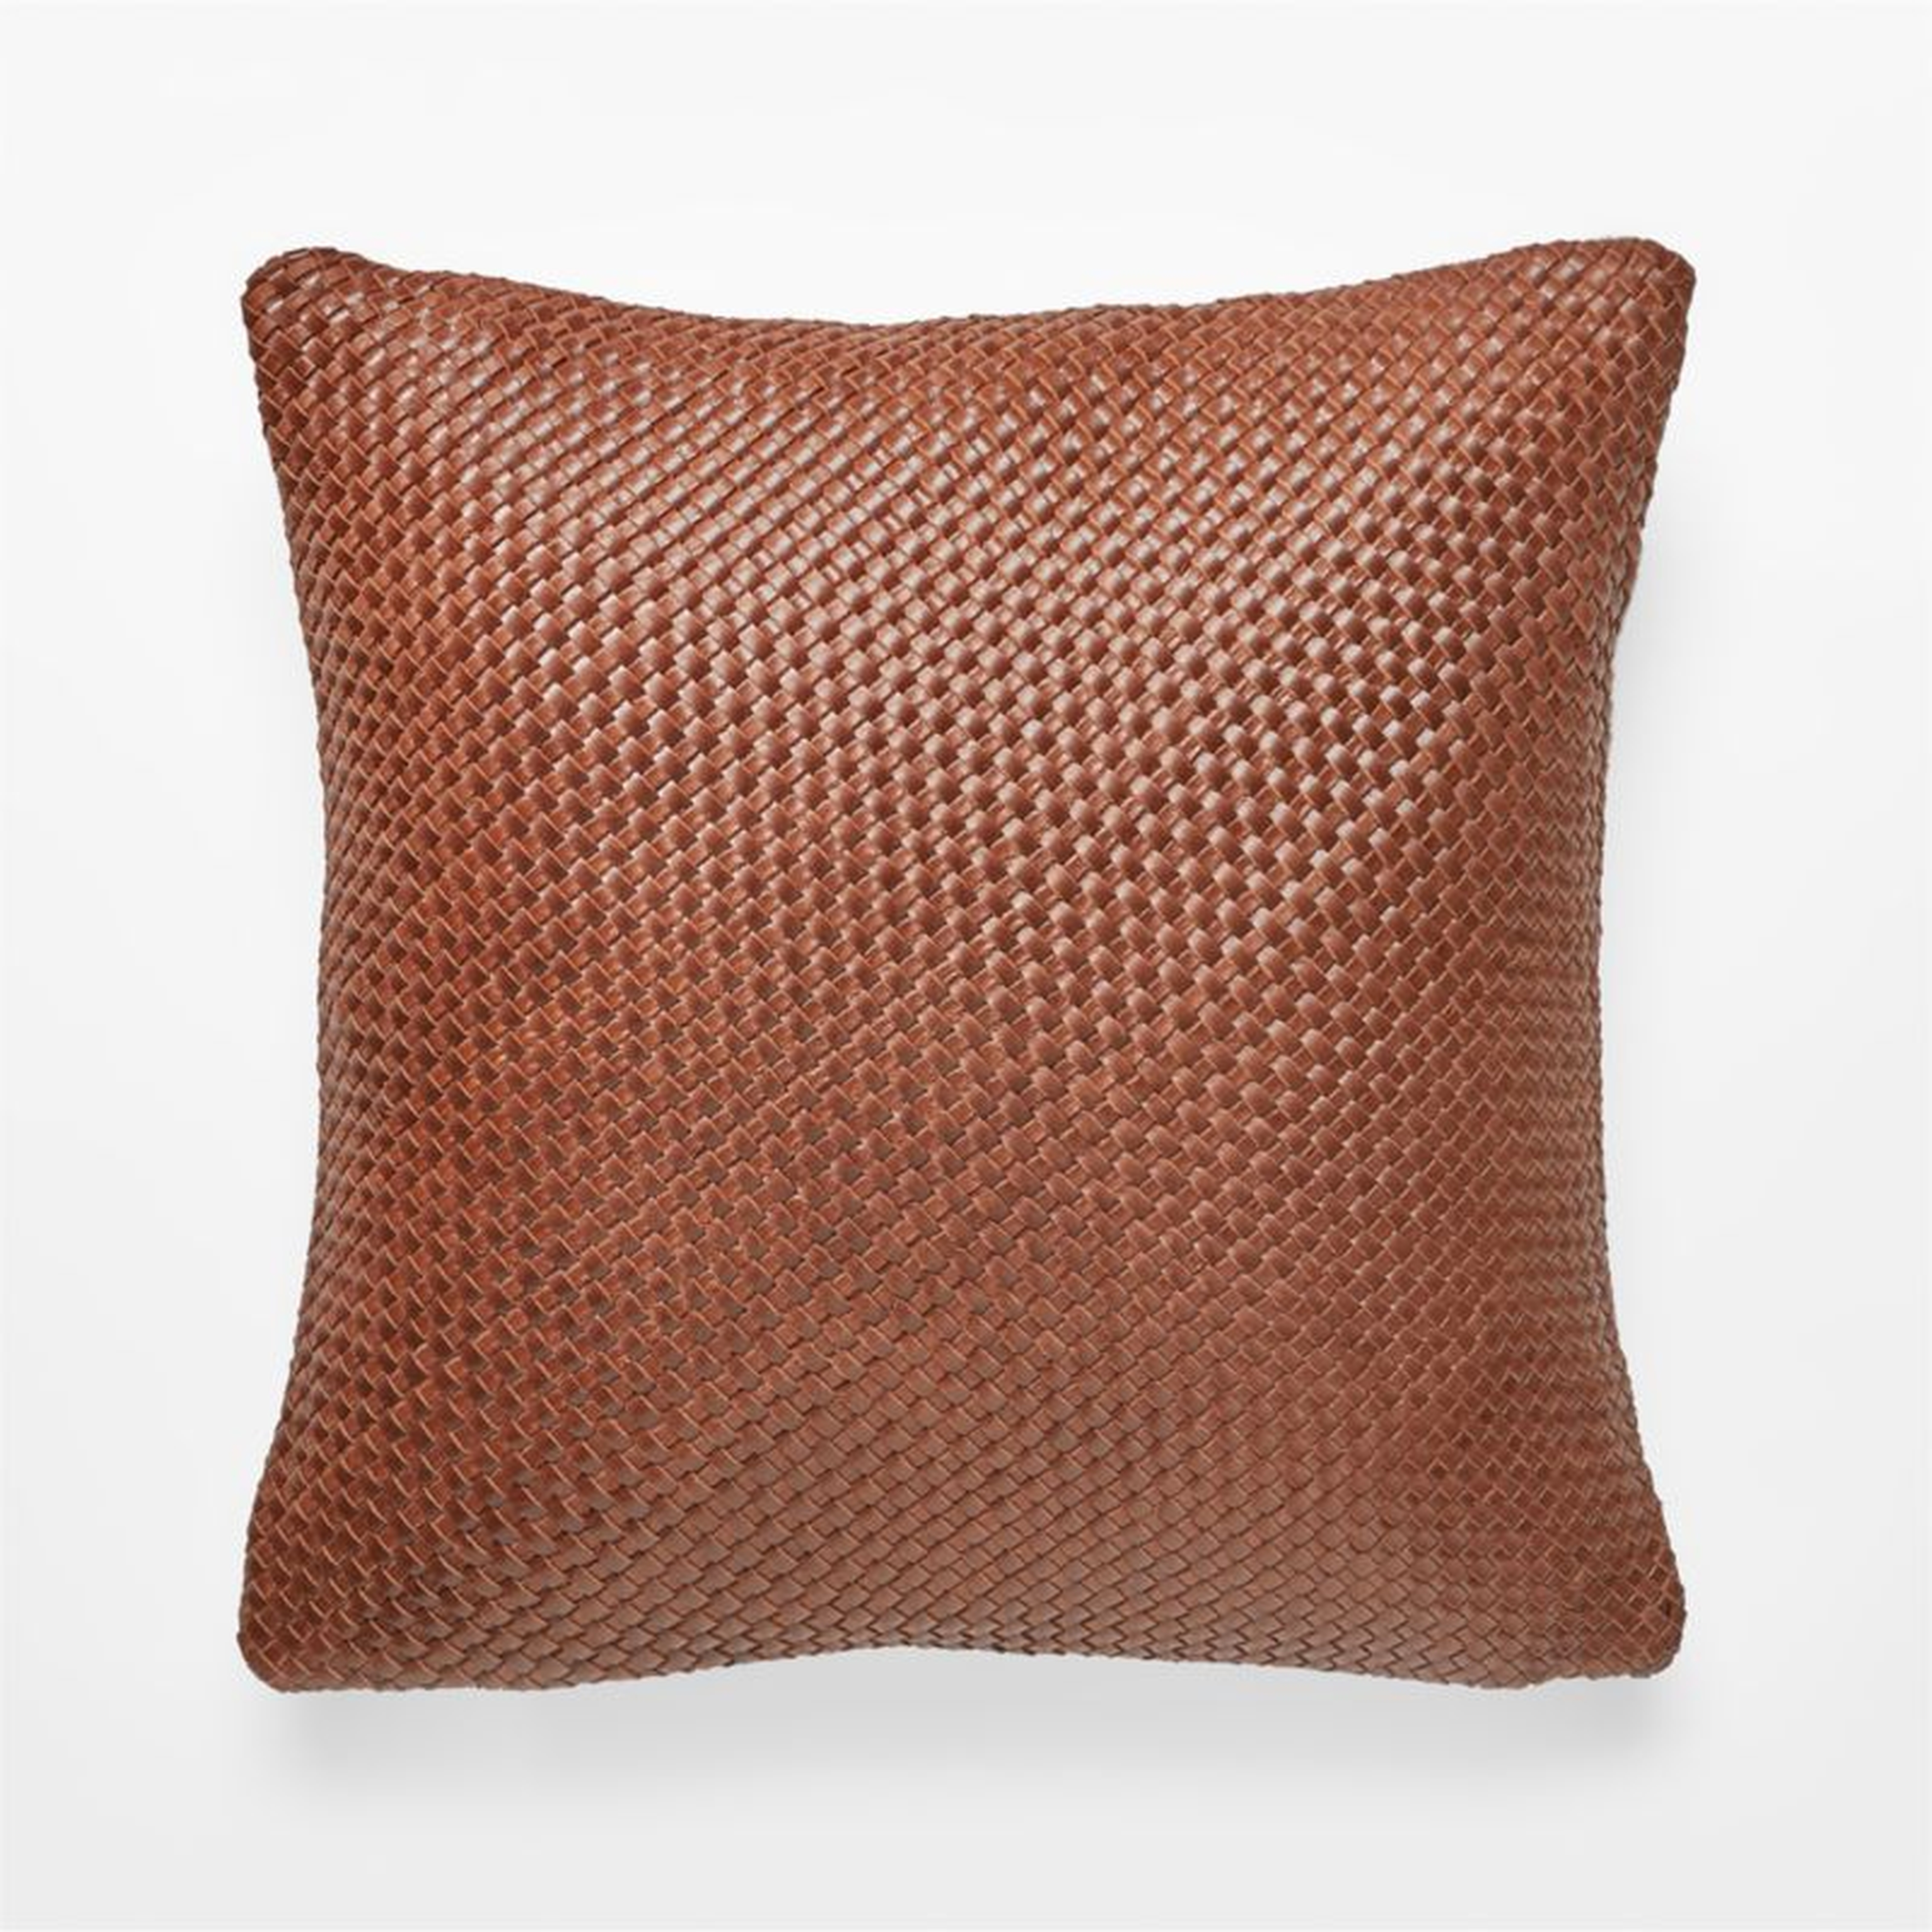 Route Leather Pillow with Down-Alternative Insert, Chocolate, 18"x 18" - CB2